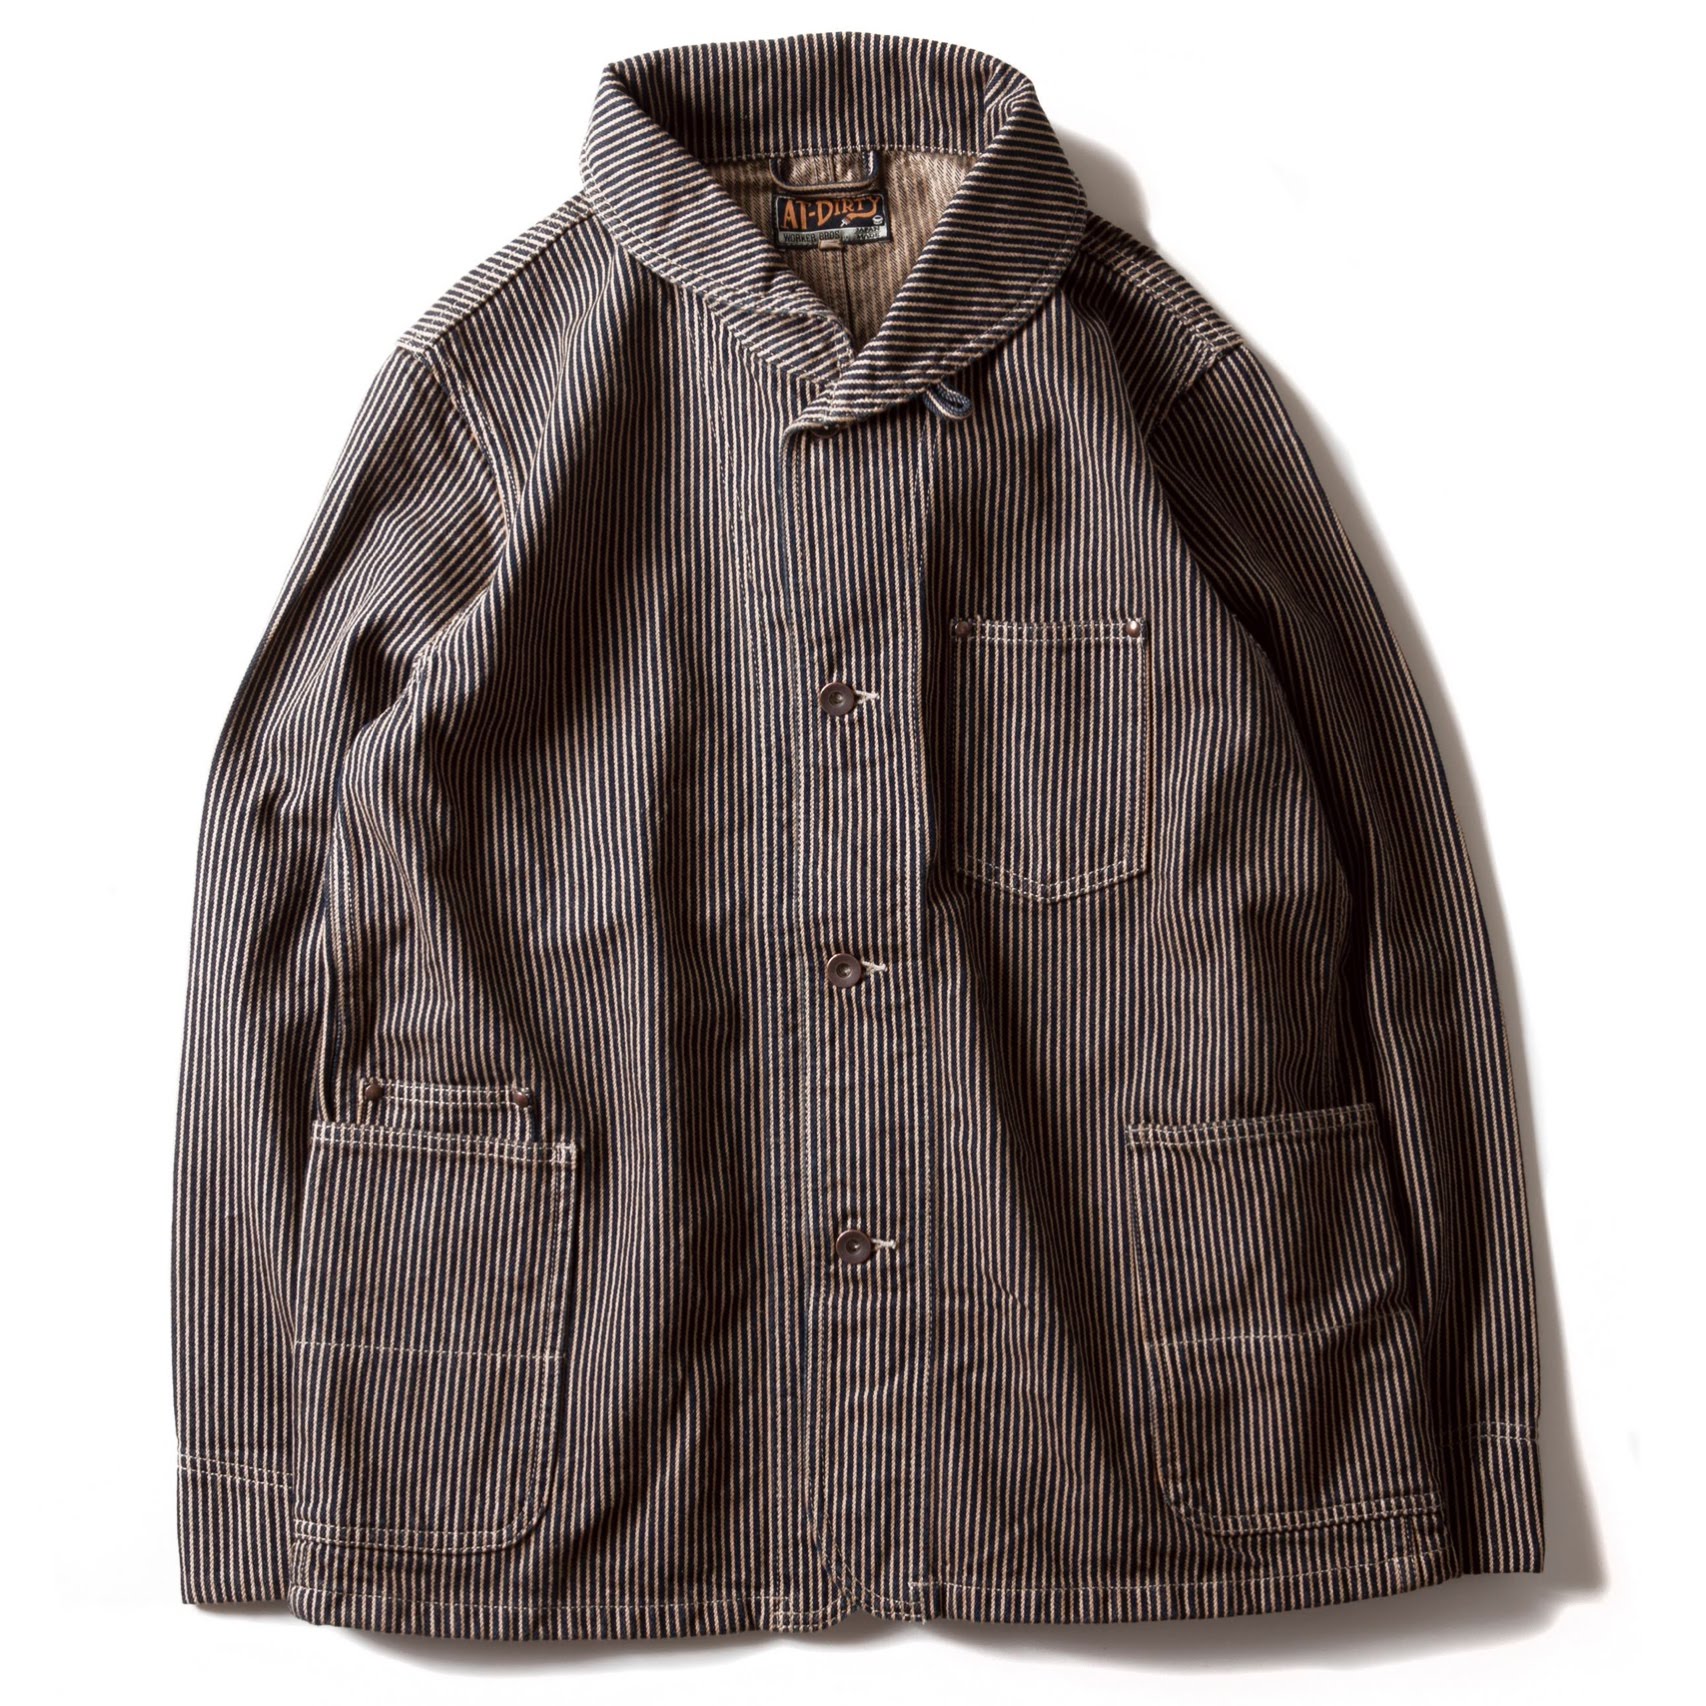 AT-DIRTY/WORKERS JACKET (BROWN HICKORY)